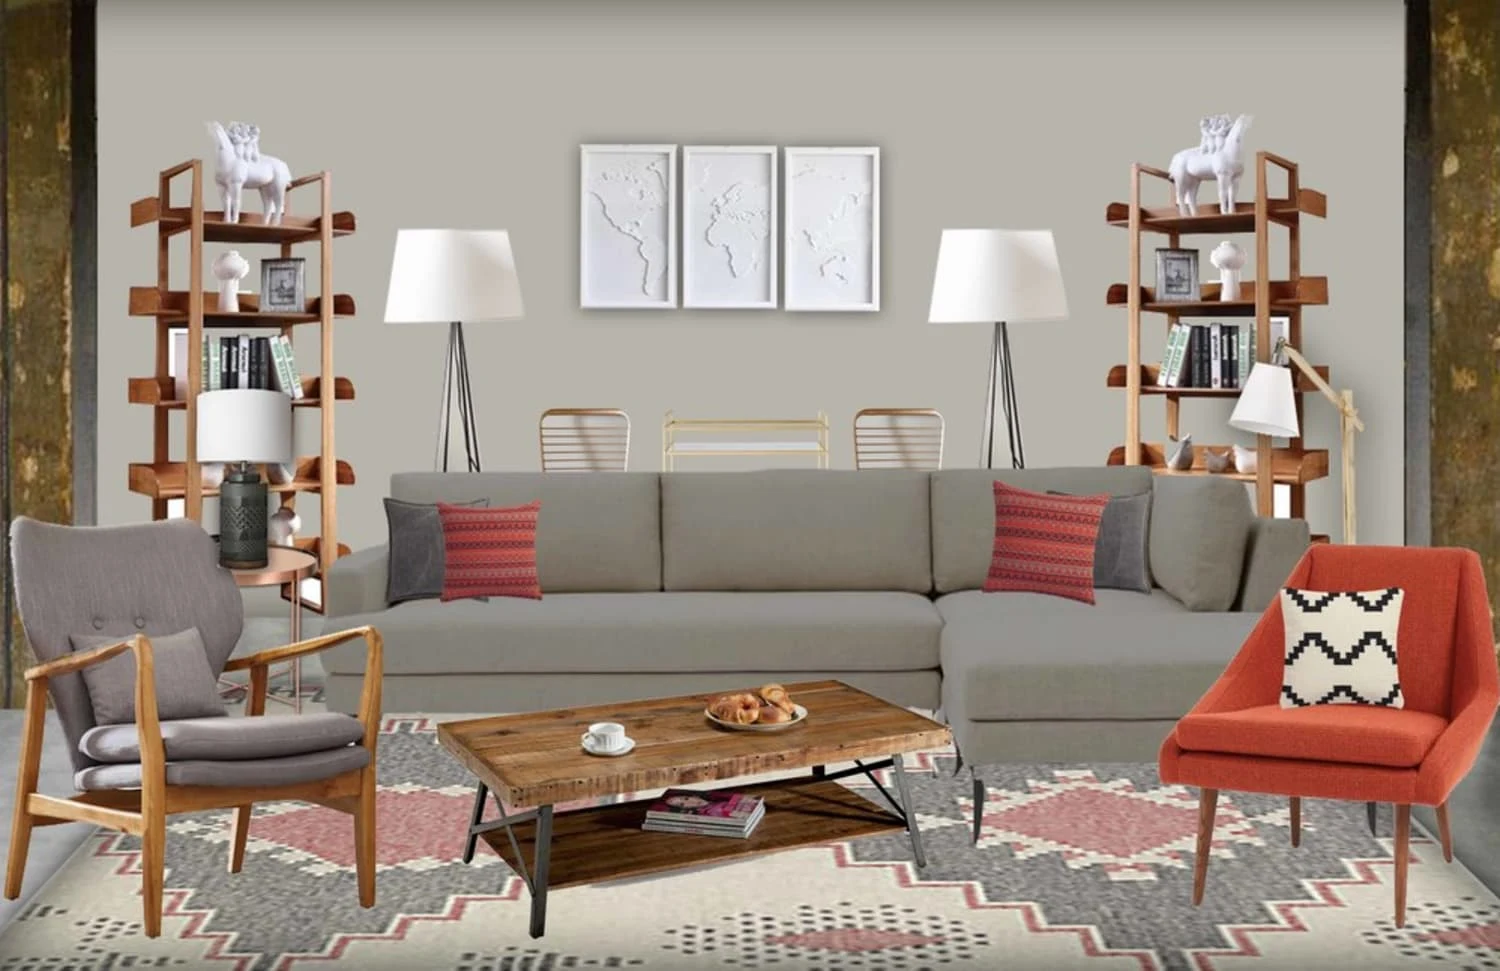 Home Depot Now Offers Interior Design Services | Apartment Therapy